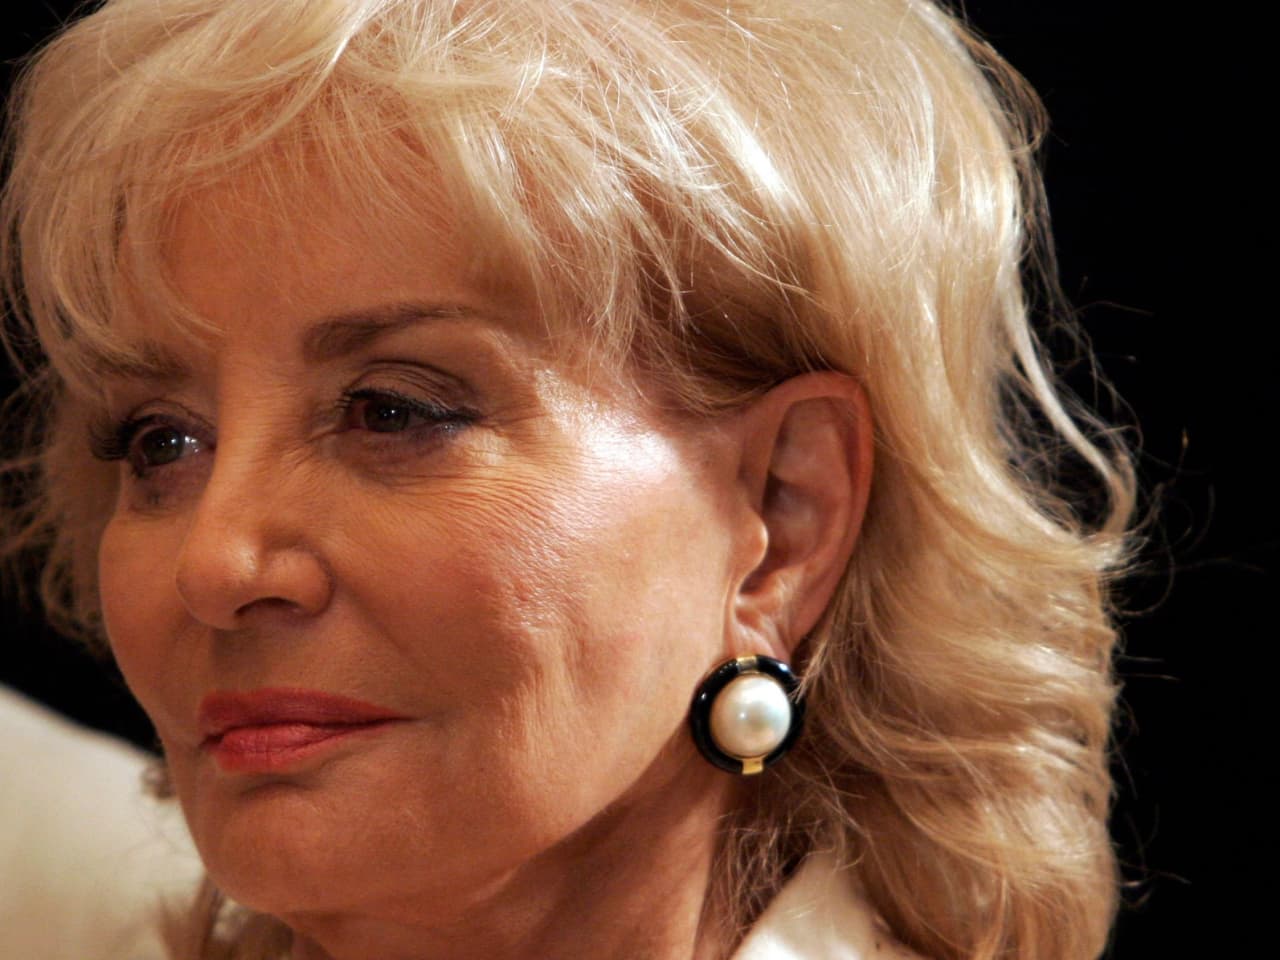 Barbara Walters, pioneering news anchor, has died at 93 - MarketWatch